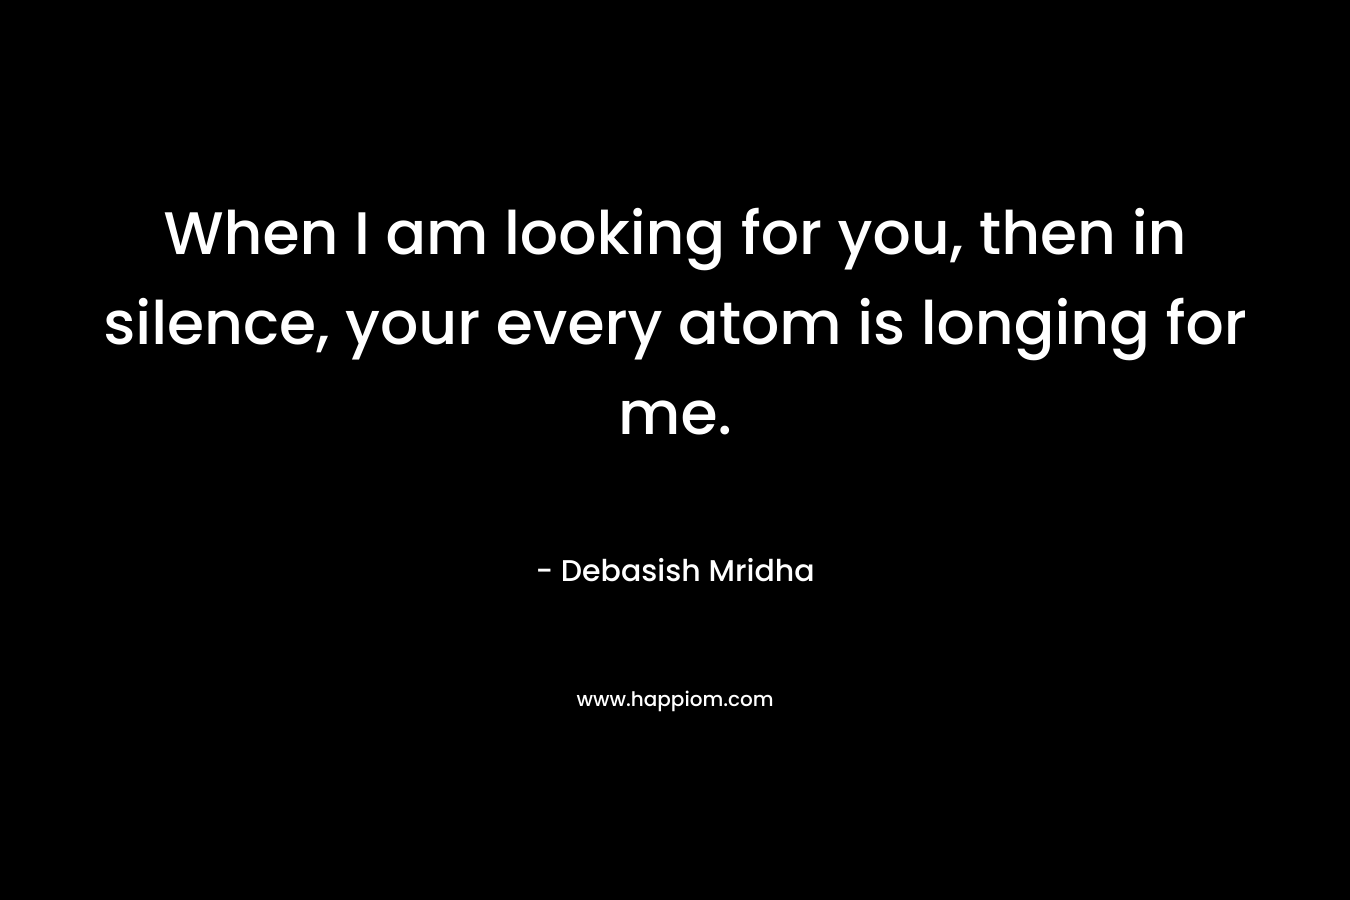 When I am looking for you, then in silence, your every atom is longing for me.